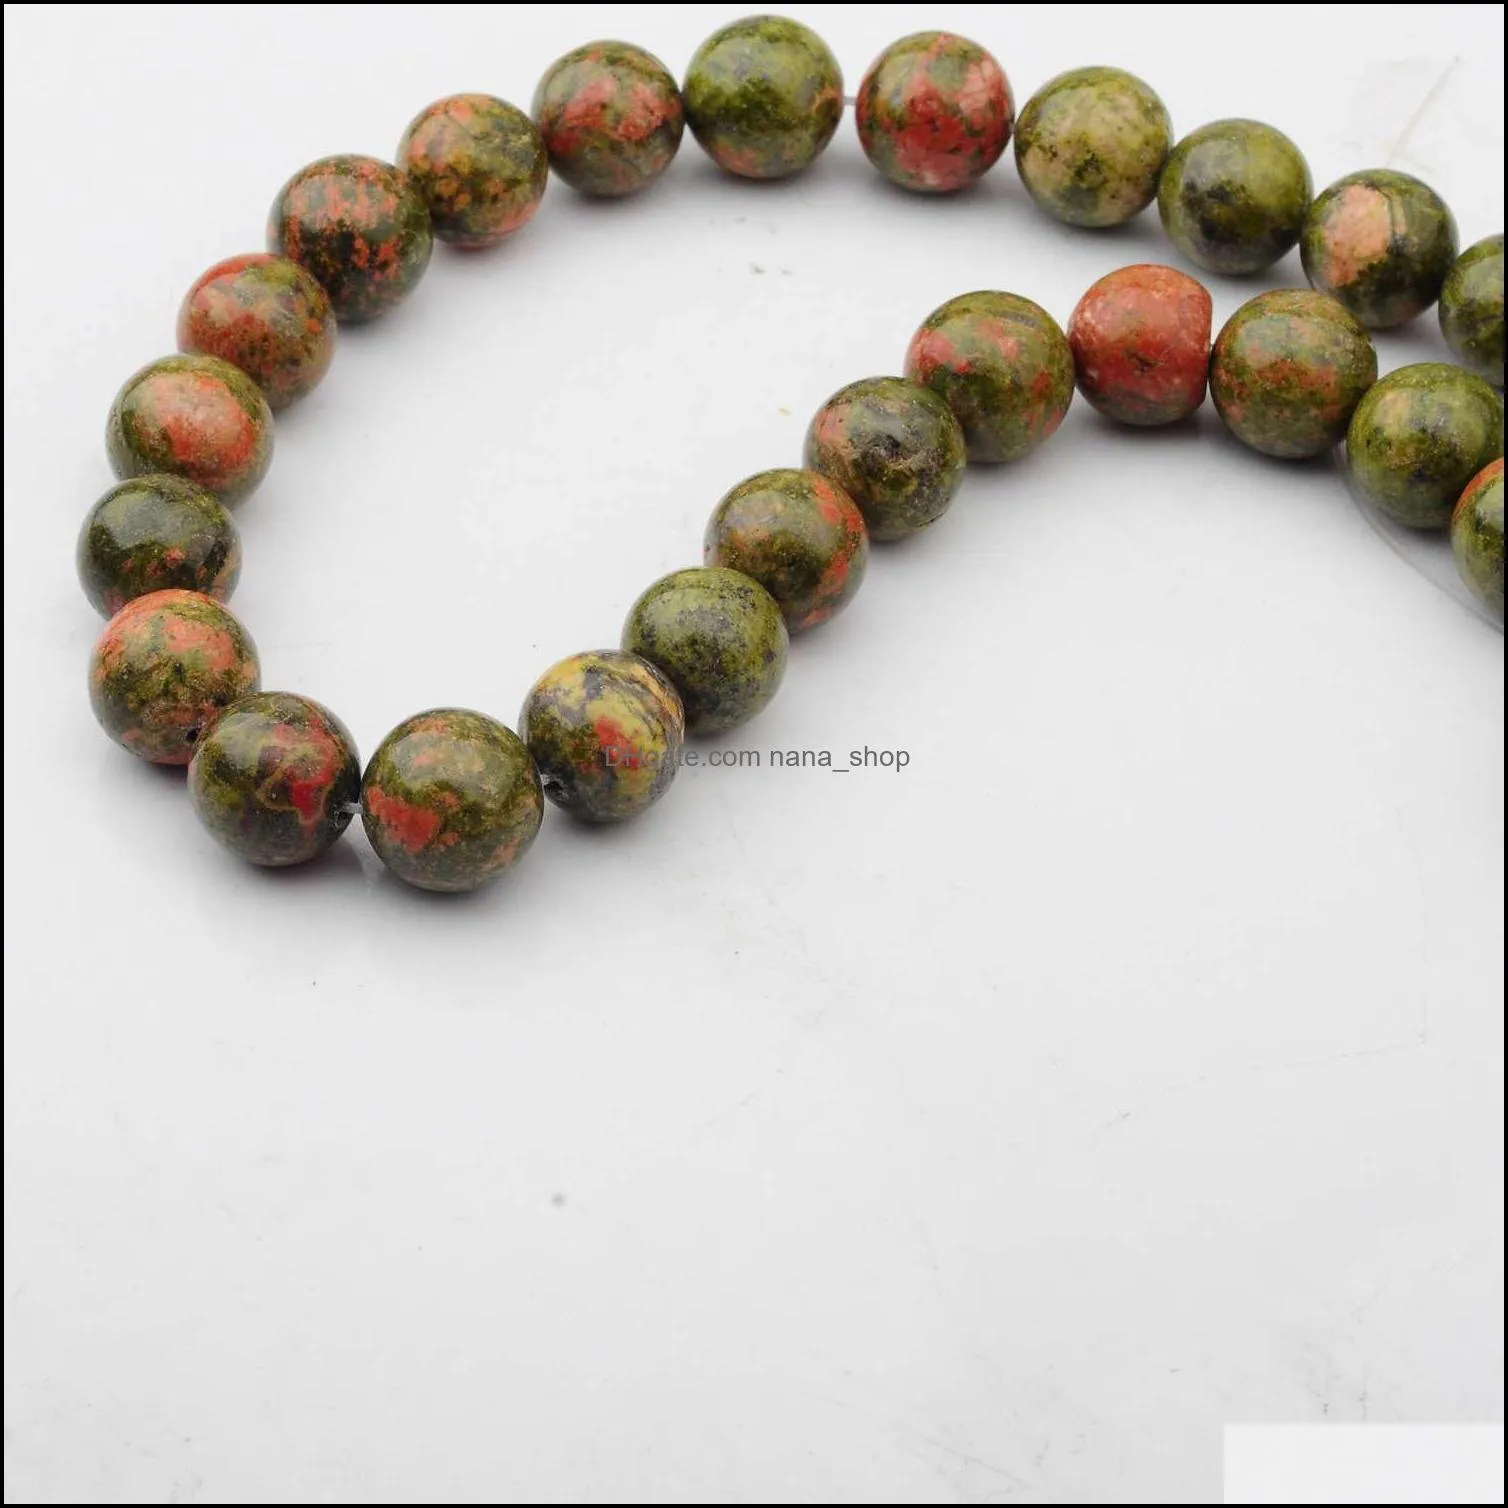 natural gemstone unakite 14mm round beads for diy making charm jewelry necklace bracelet loose 28pcs stone beads for wholesales